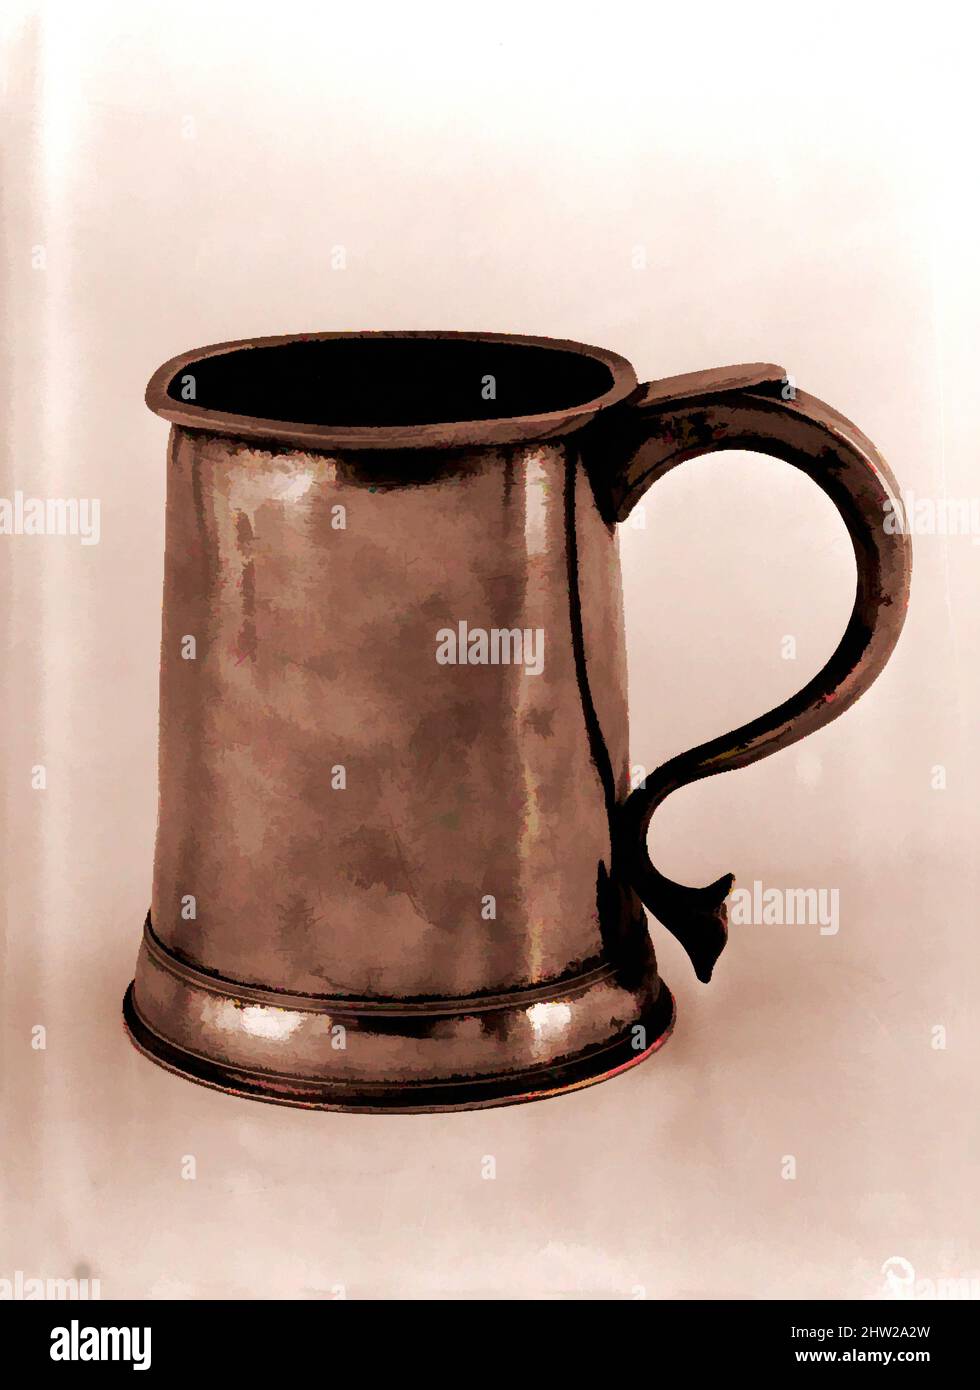 https://c8.alamy.com/comp/2HW2A2W/art-inspired-by-pint-mug-176080-possibly-made-in-newport-rhode-island-united-states-possibly-made-in-boston-massachusetts-united-states-american-pewter-h-4-34-in-121-cm-metal-r-b-classic-works-modernized-by-artotop-with-a-splash-of-modernity-shapes-color-and-value-eye-catching-visual-impact-on-art-emotions-through-freedom-of-artworks-in-a-contemporary-way-a-timeless-message-pursuing-a-wildly-creative-new-direction-artists-turning-to-the-digital-medium-and-creating-the-artotop-nft-2HW2A2W.jpg